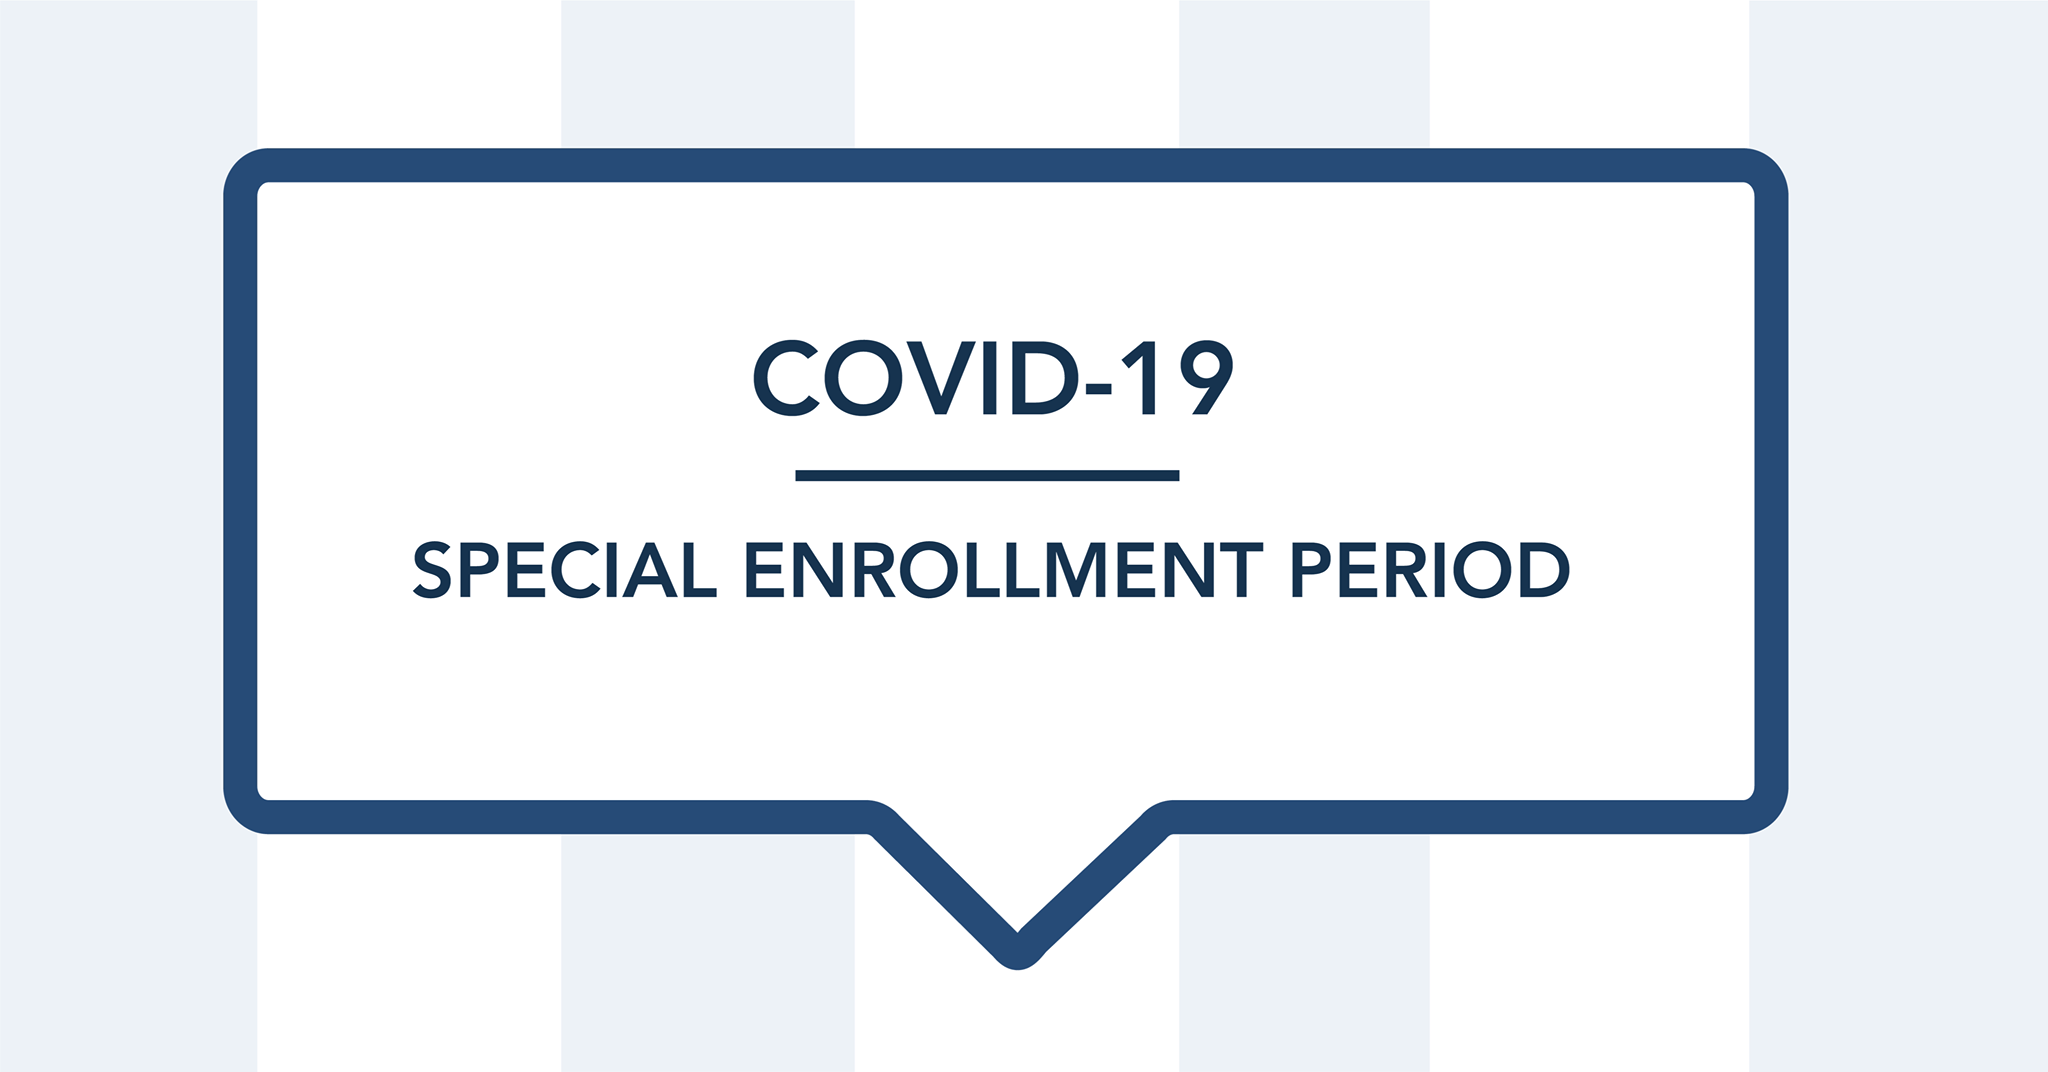 2021 Special Enrollment Period in Response to Covid-19